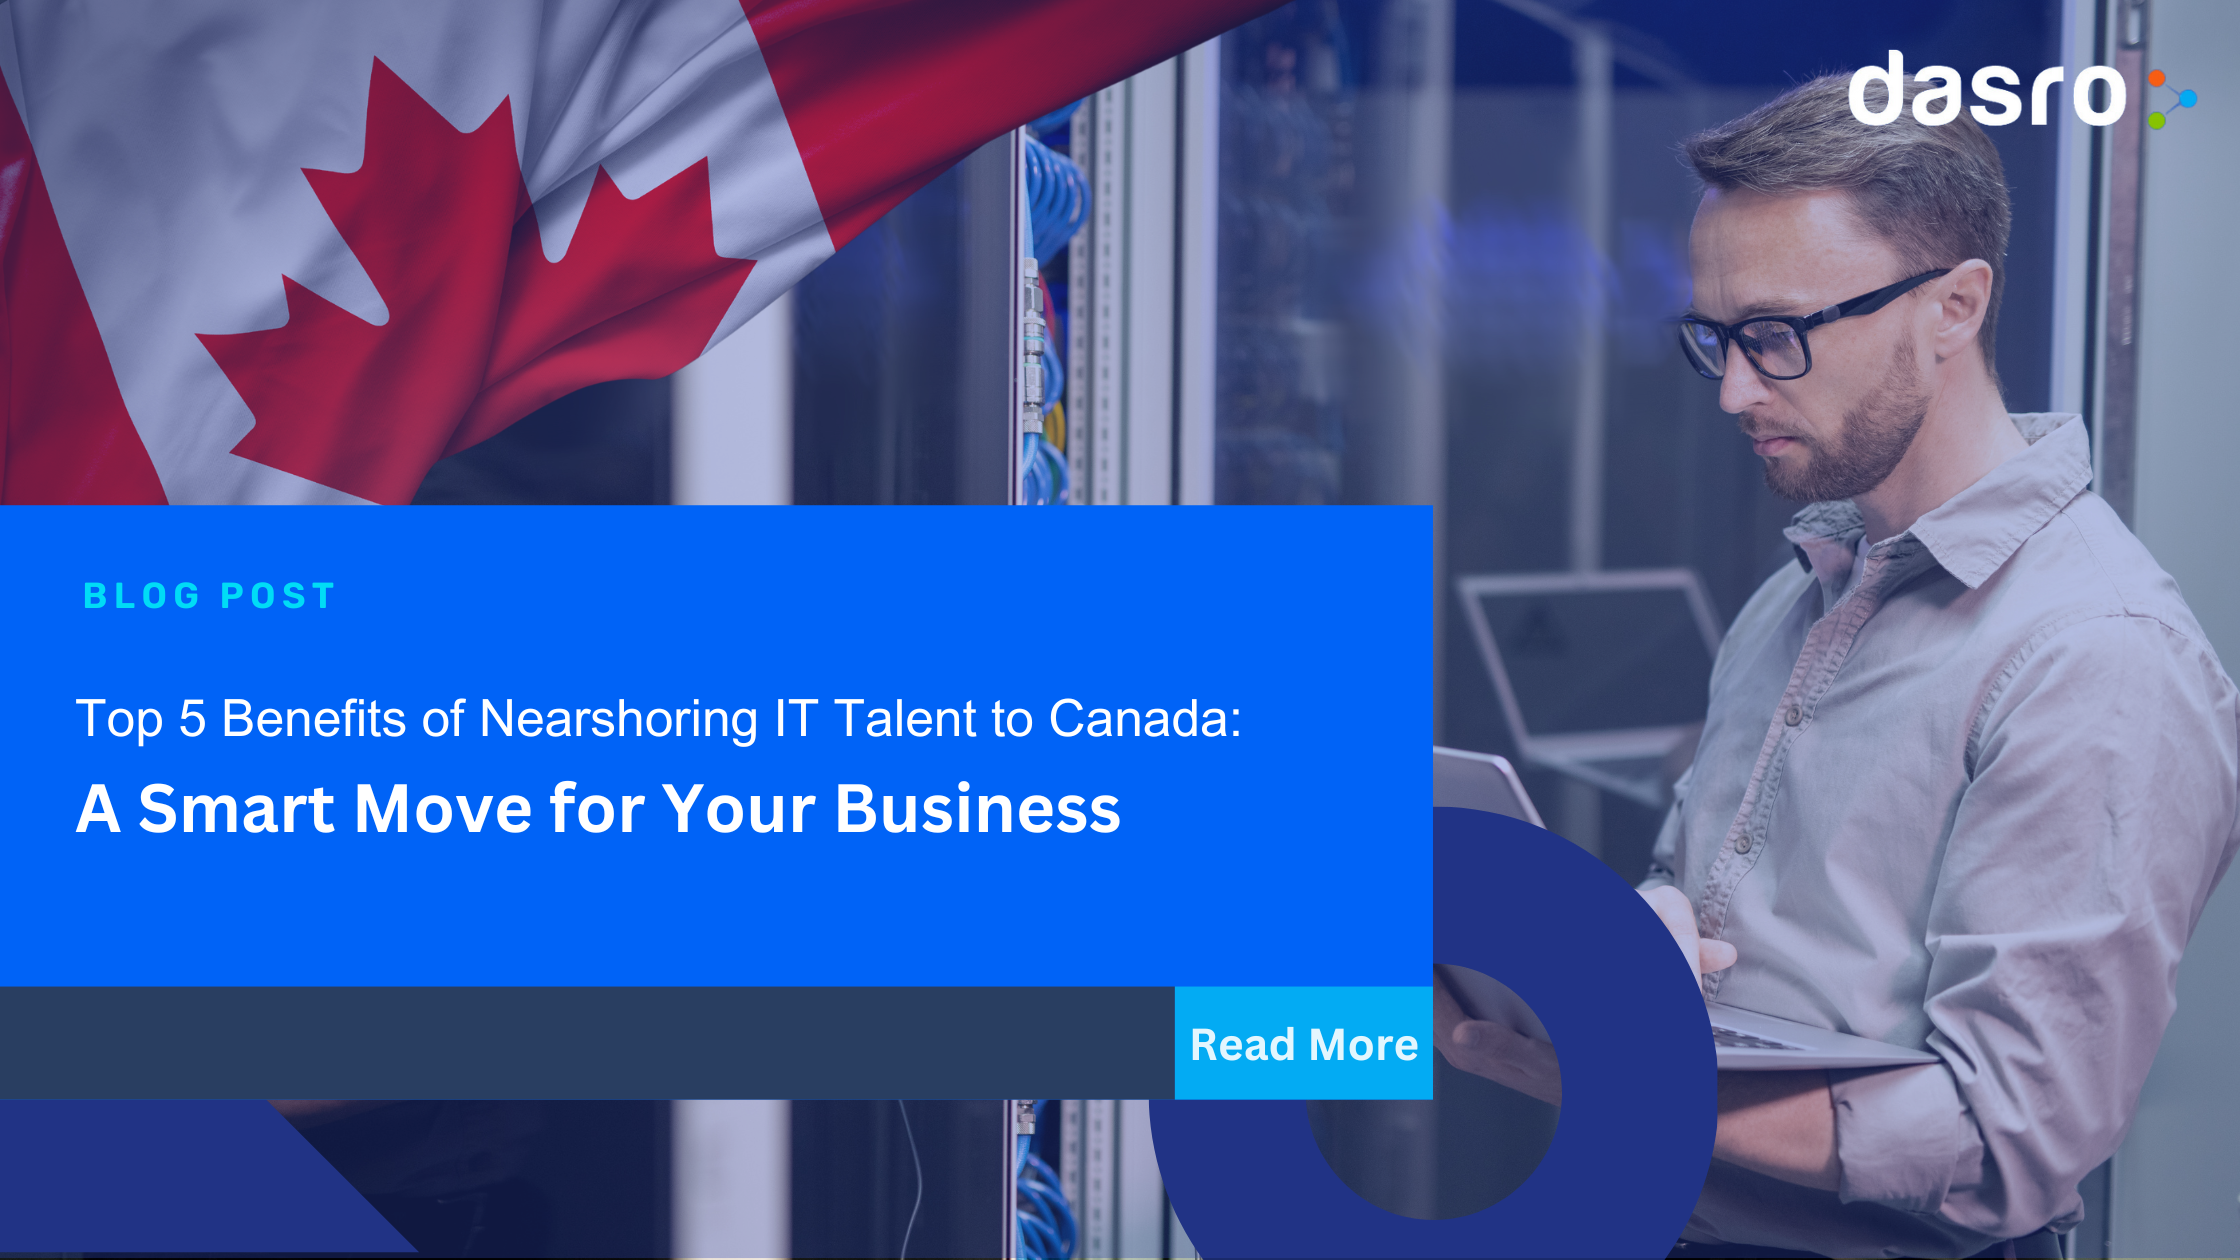 Top 5 Benefits of Nearshoring IT Talent to Canada: A Smart Move for Your Business